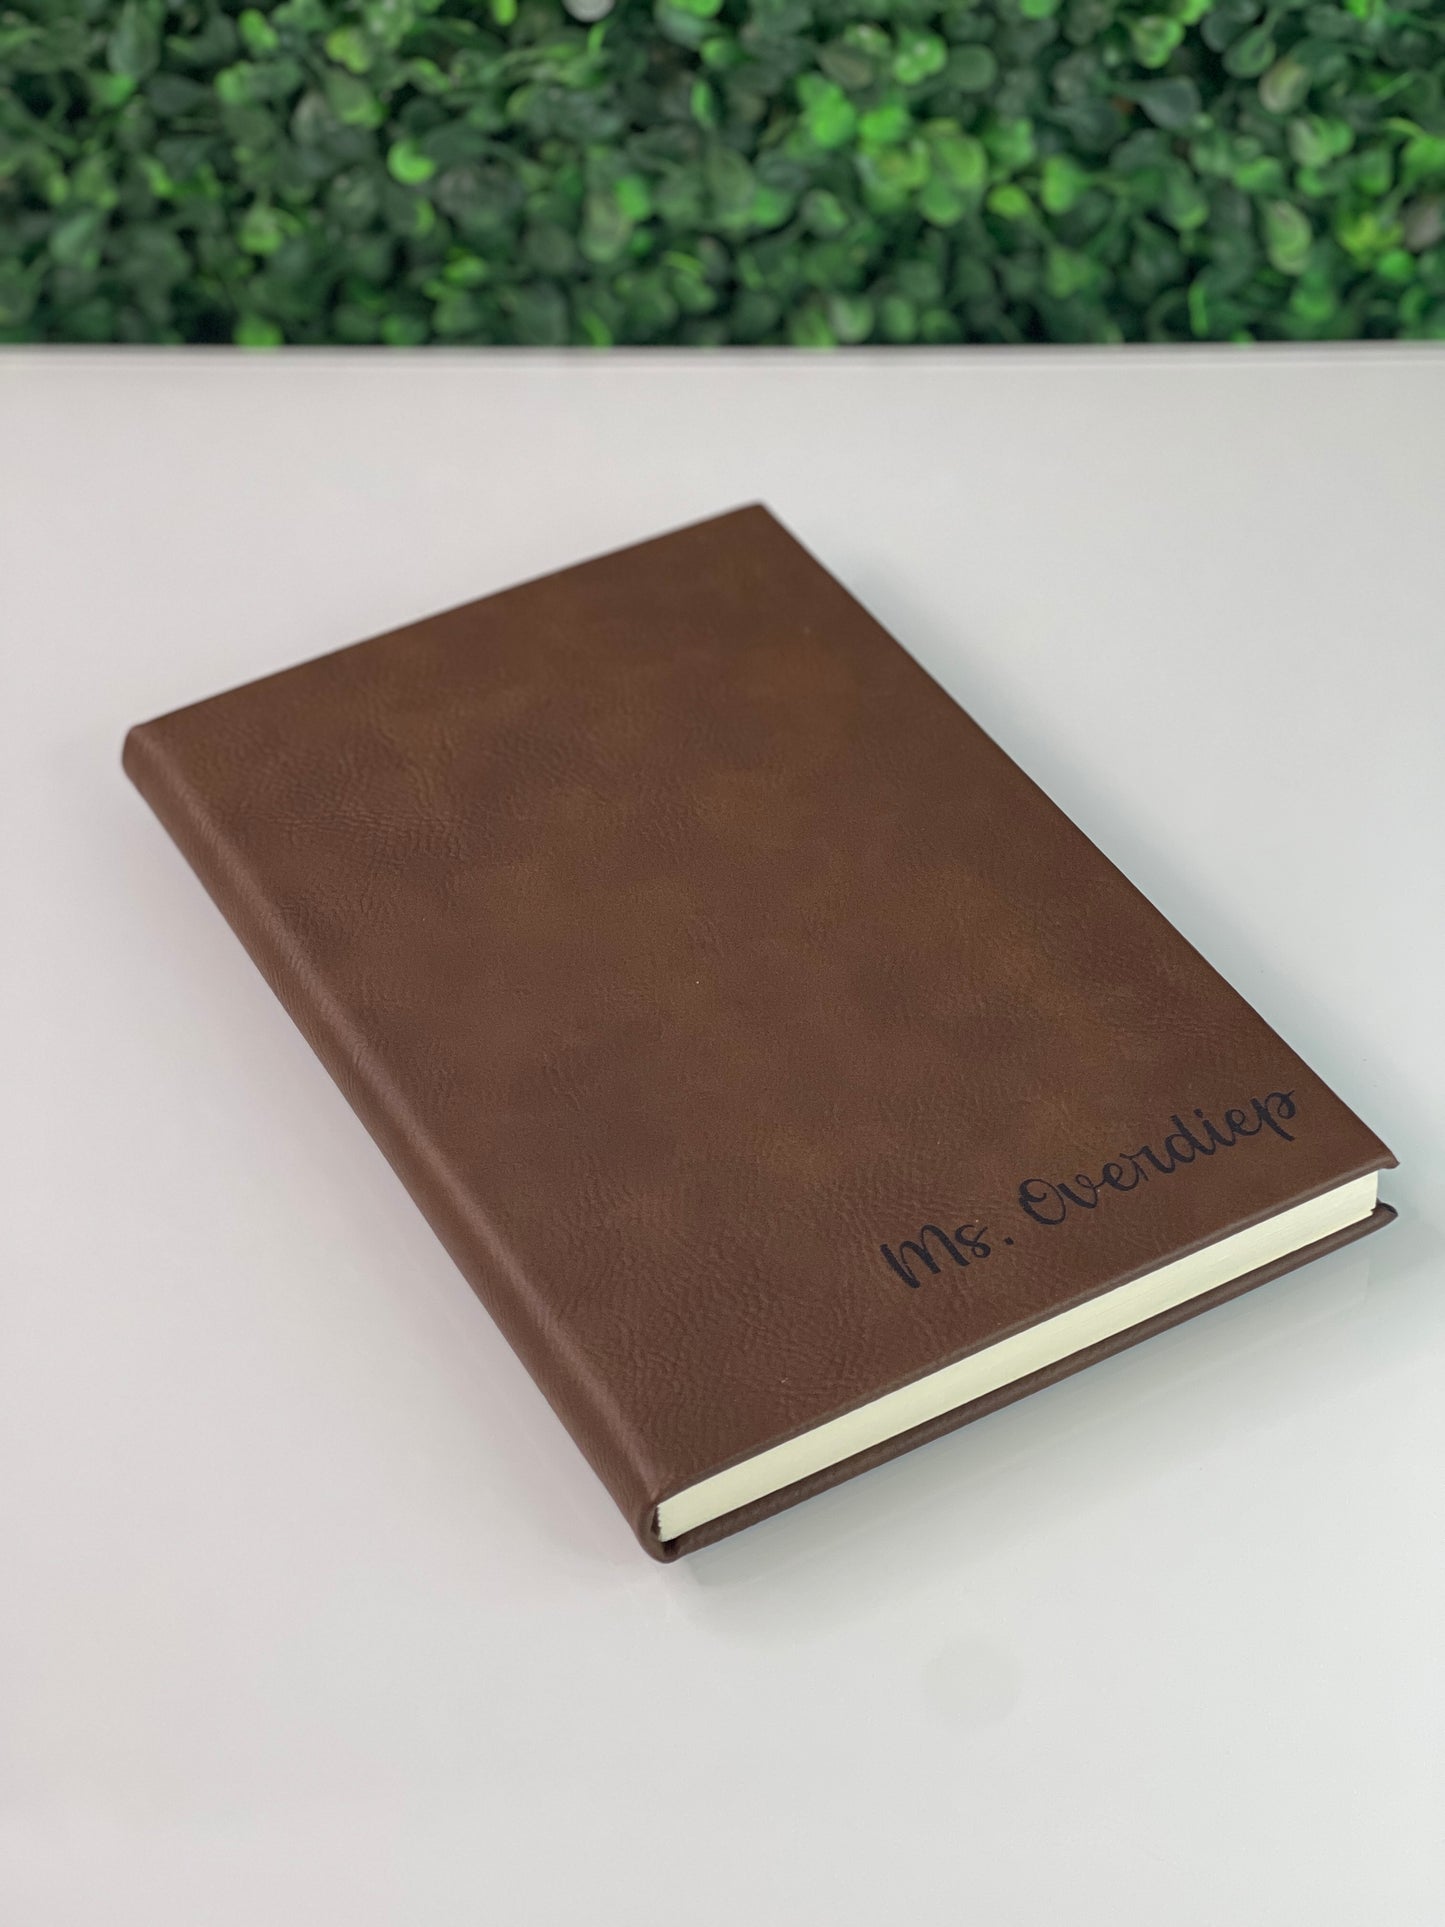 Personalized Vegan Leather Journal